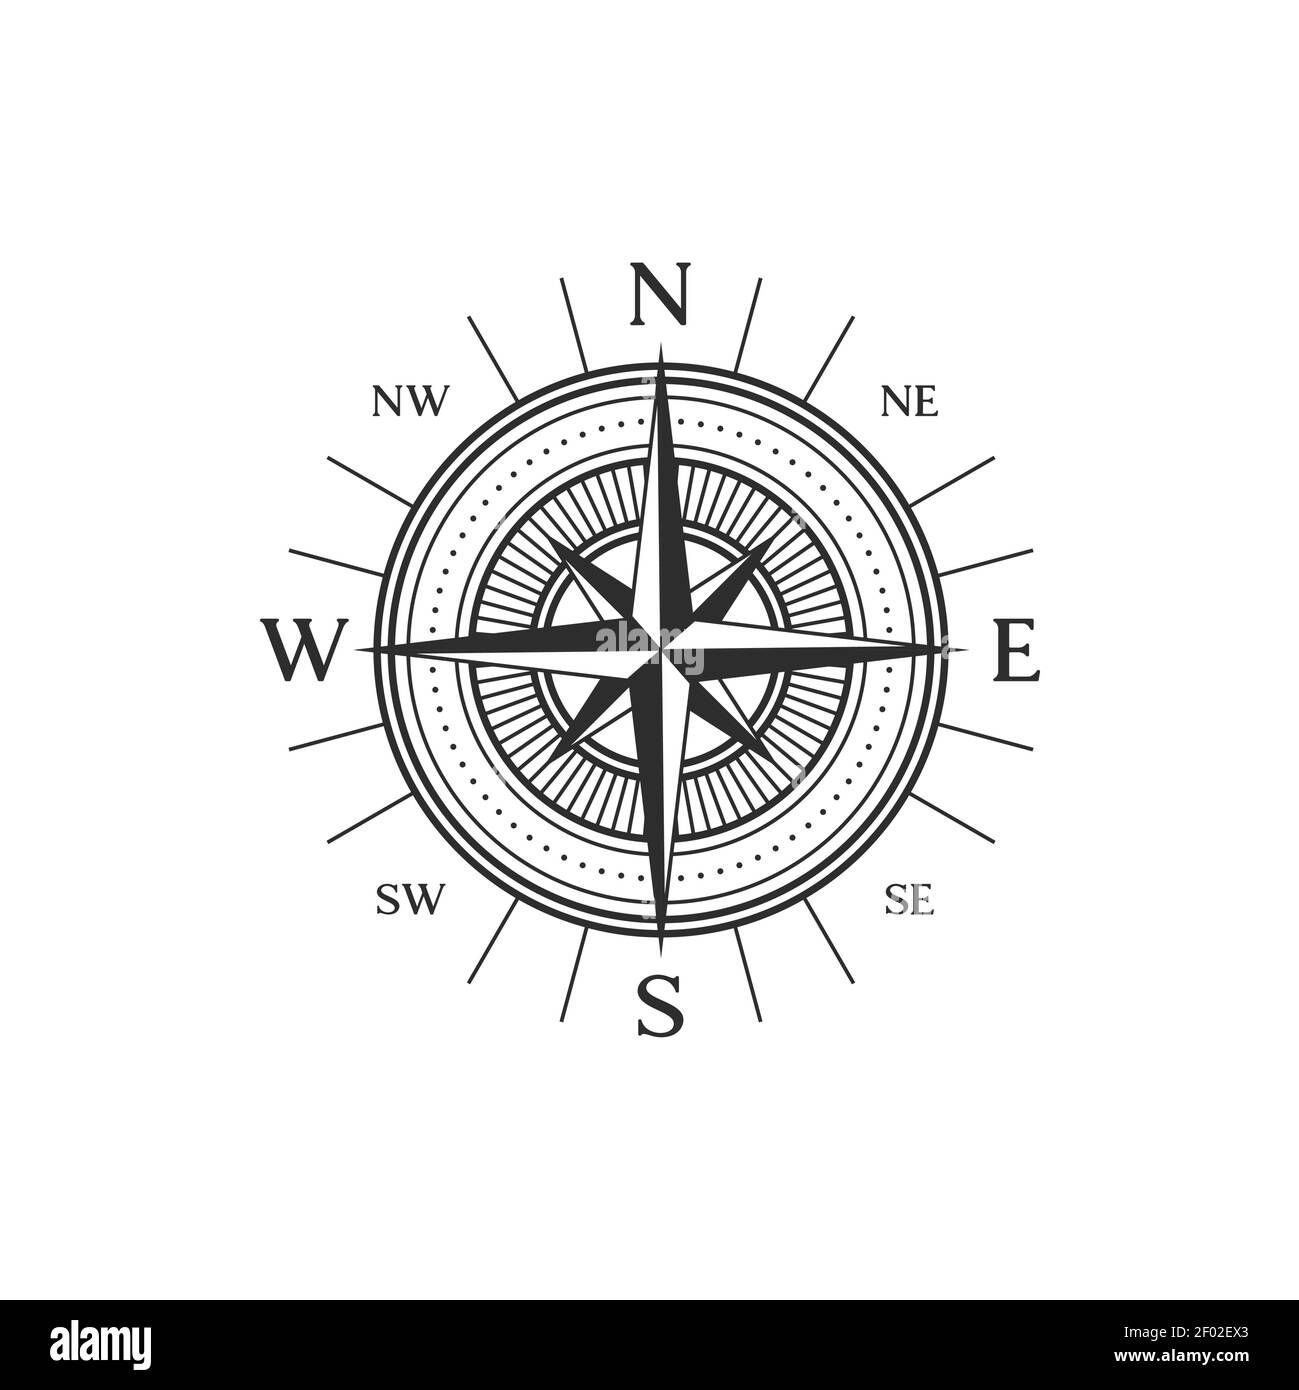 Wind rose Black and White Stock Photos & Images - Alamy